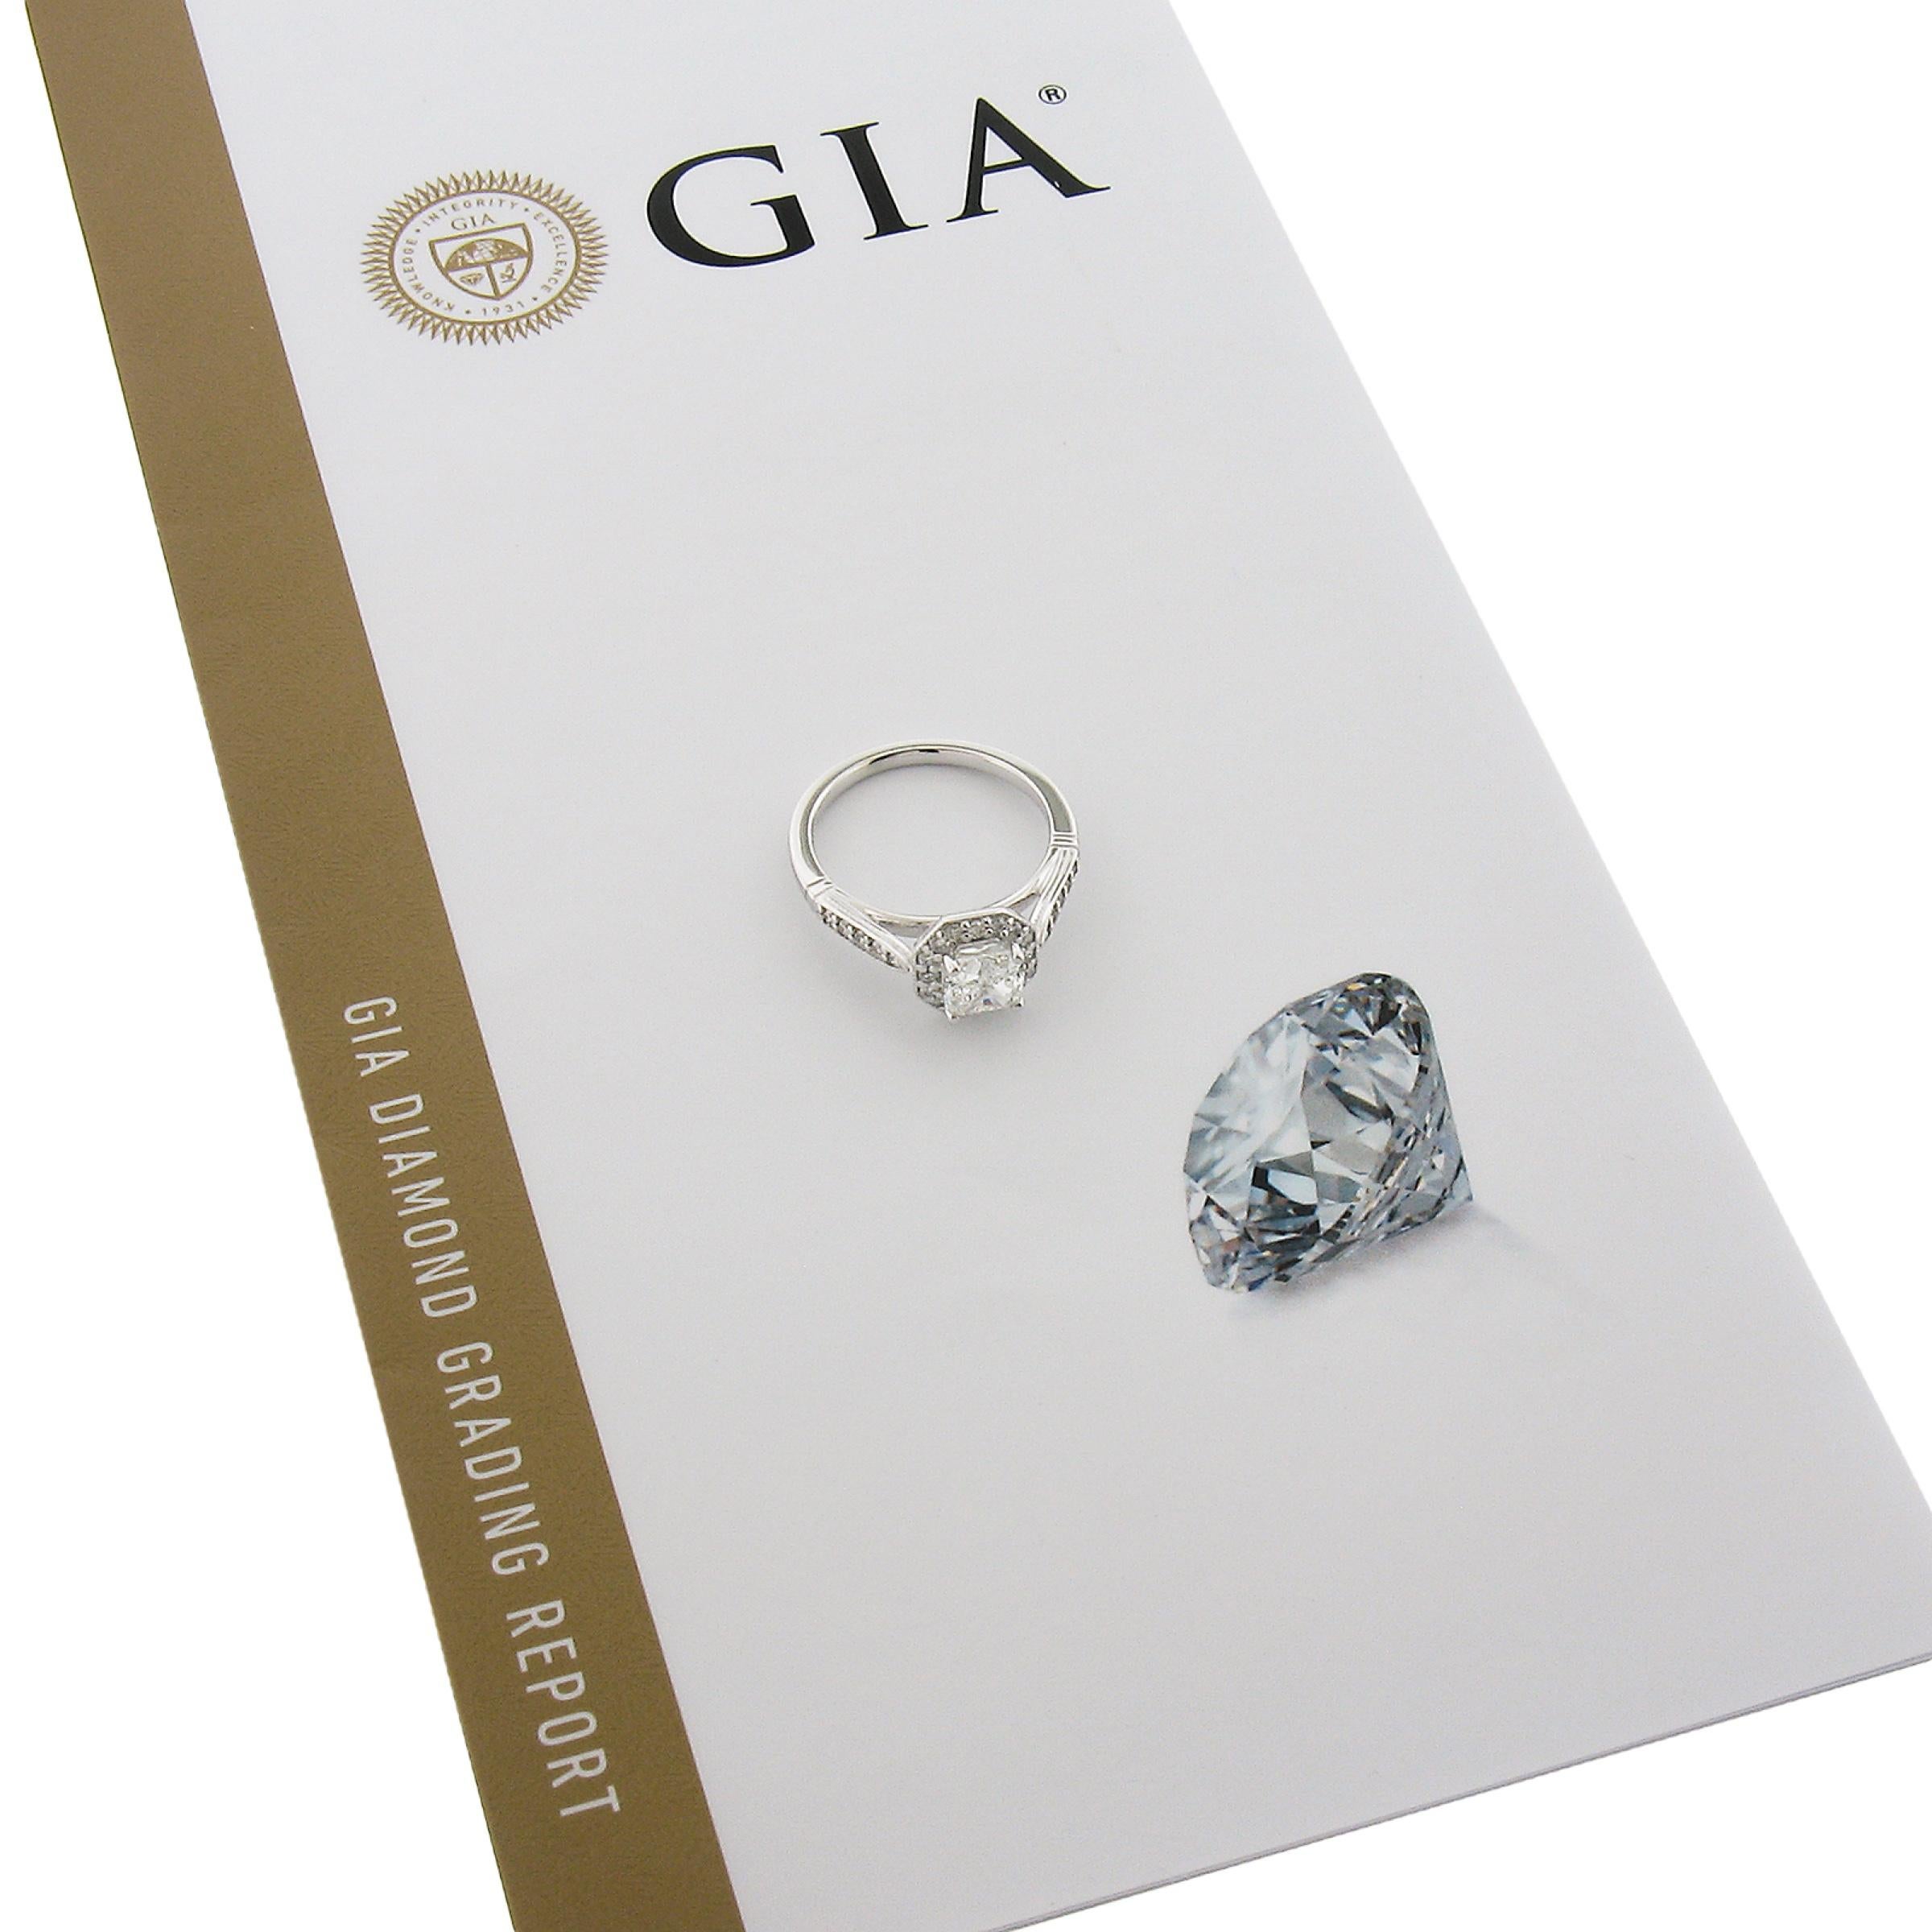 This classically refined diamond engagement ring is crafted in solid 18k white gold and features a fine quality, GIA certified, cushion cut diamond that weighs 1.01 carat with near colorless (I color) and super clean (VS2 clarity). This ring is